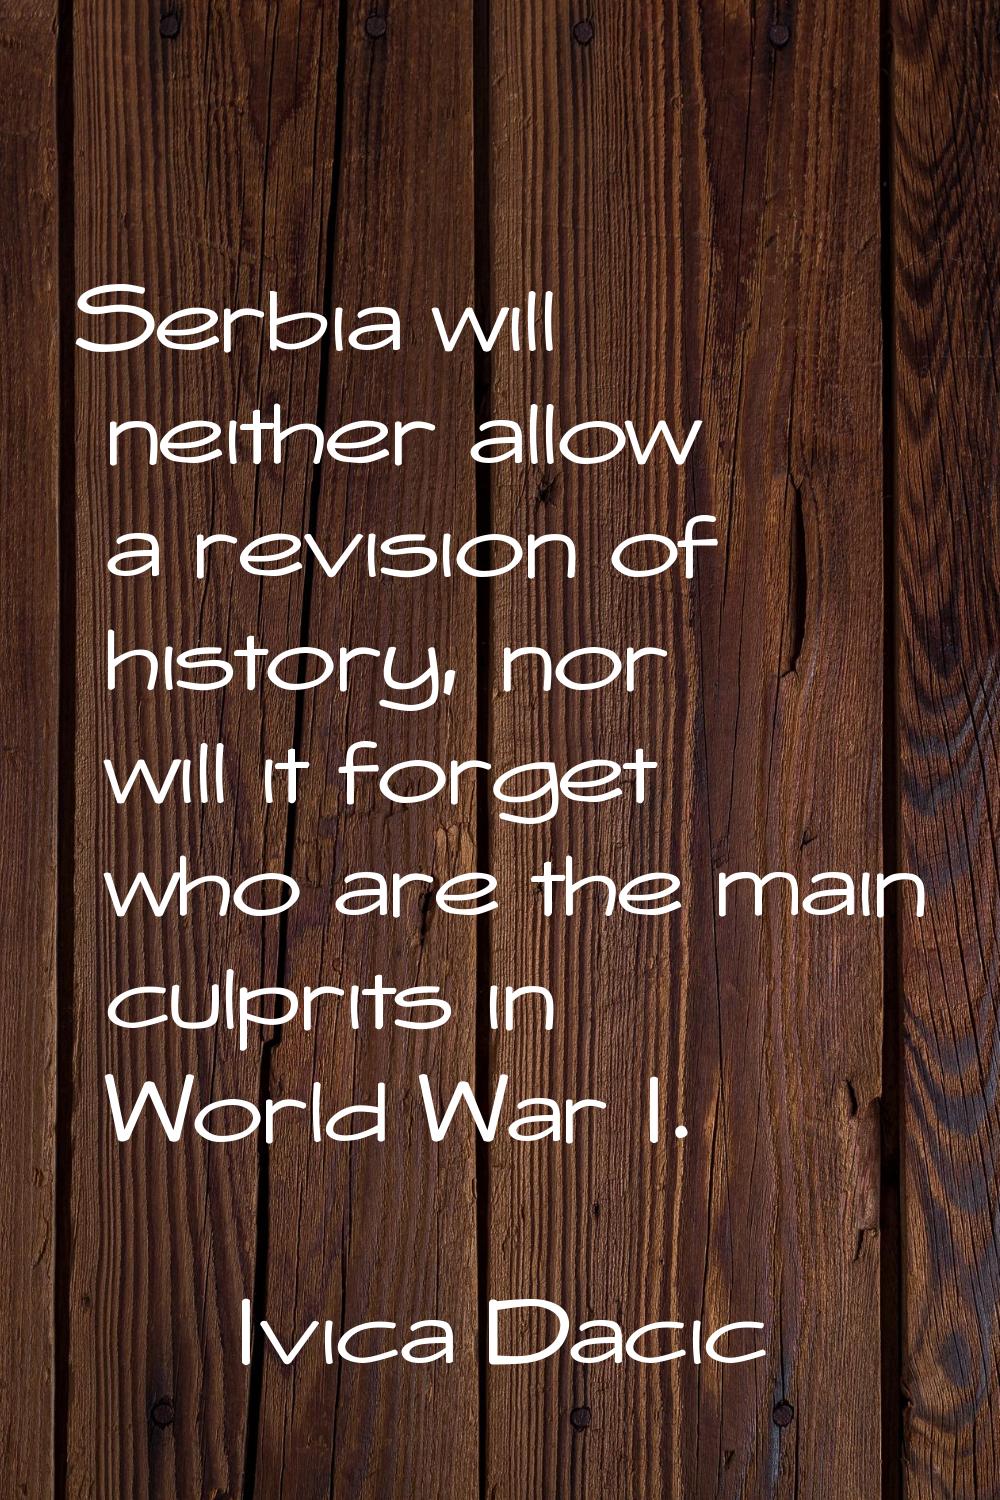 Serbia will neither allow a revision of history, nor will it forget who are the main culprits in Wo